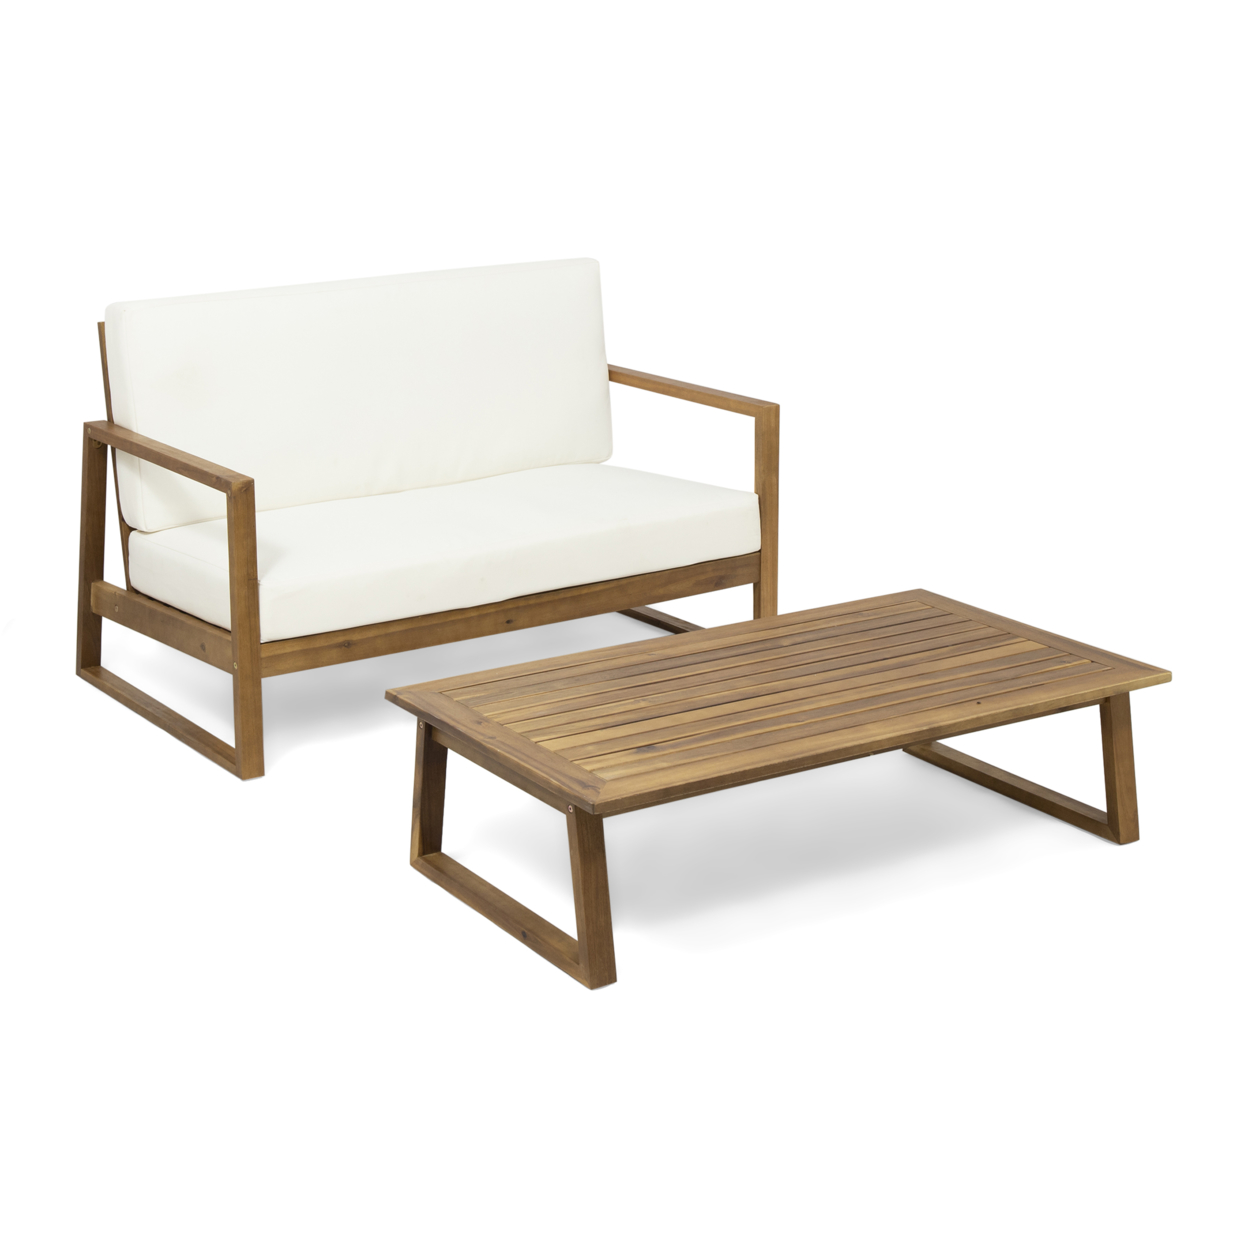 Angelia Outdoor Acacia Wood Chat Set With Coffee Table - Teak Finish, Beige